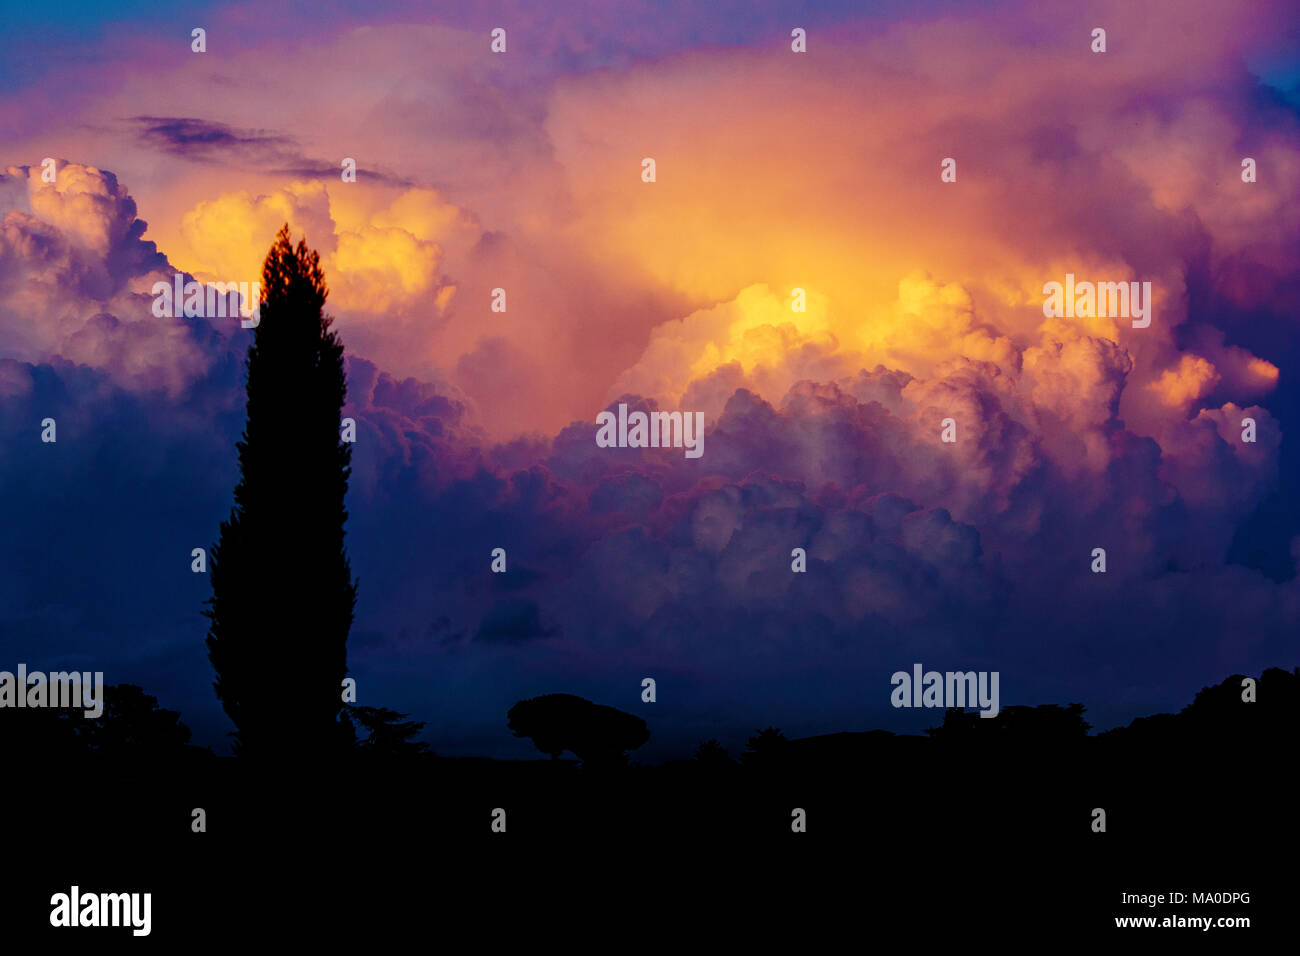 Rome (Italy) - Purple Sunset and dramatic sky with trees silhouettes Stock Photo